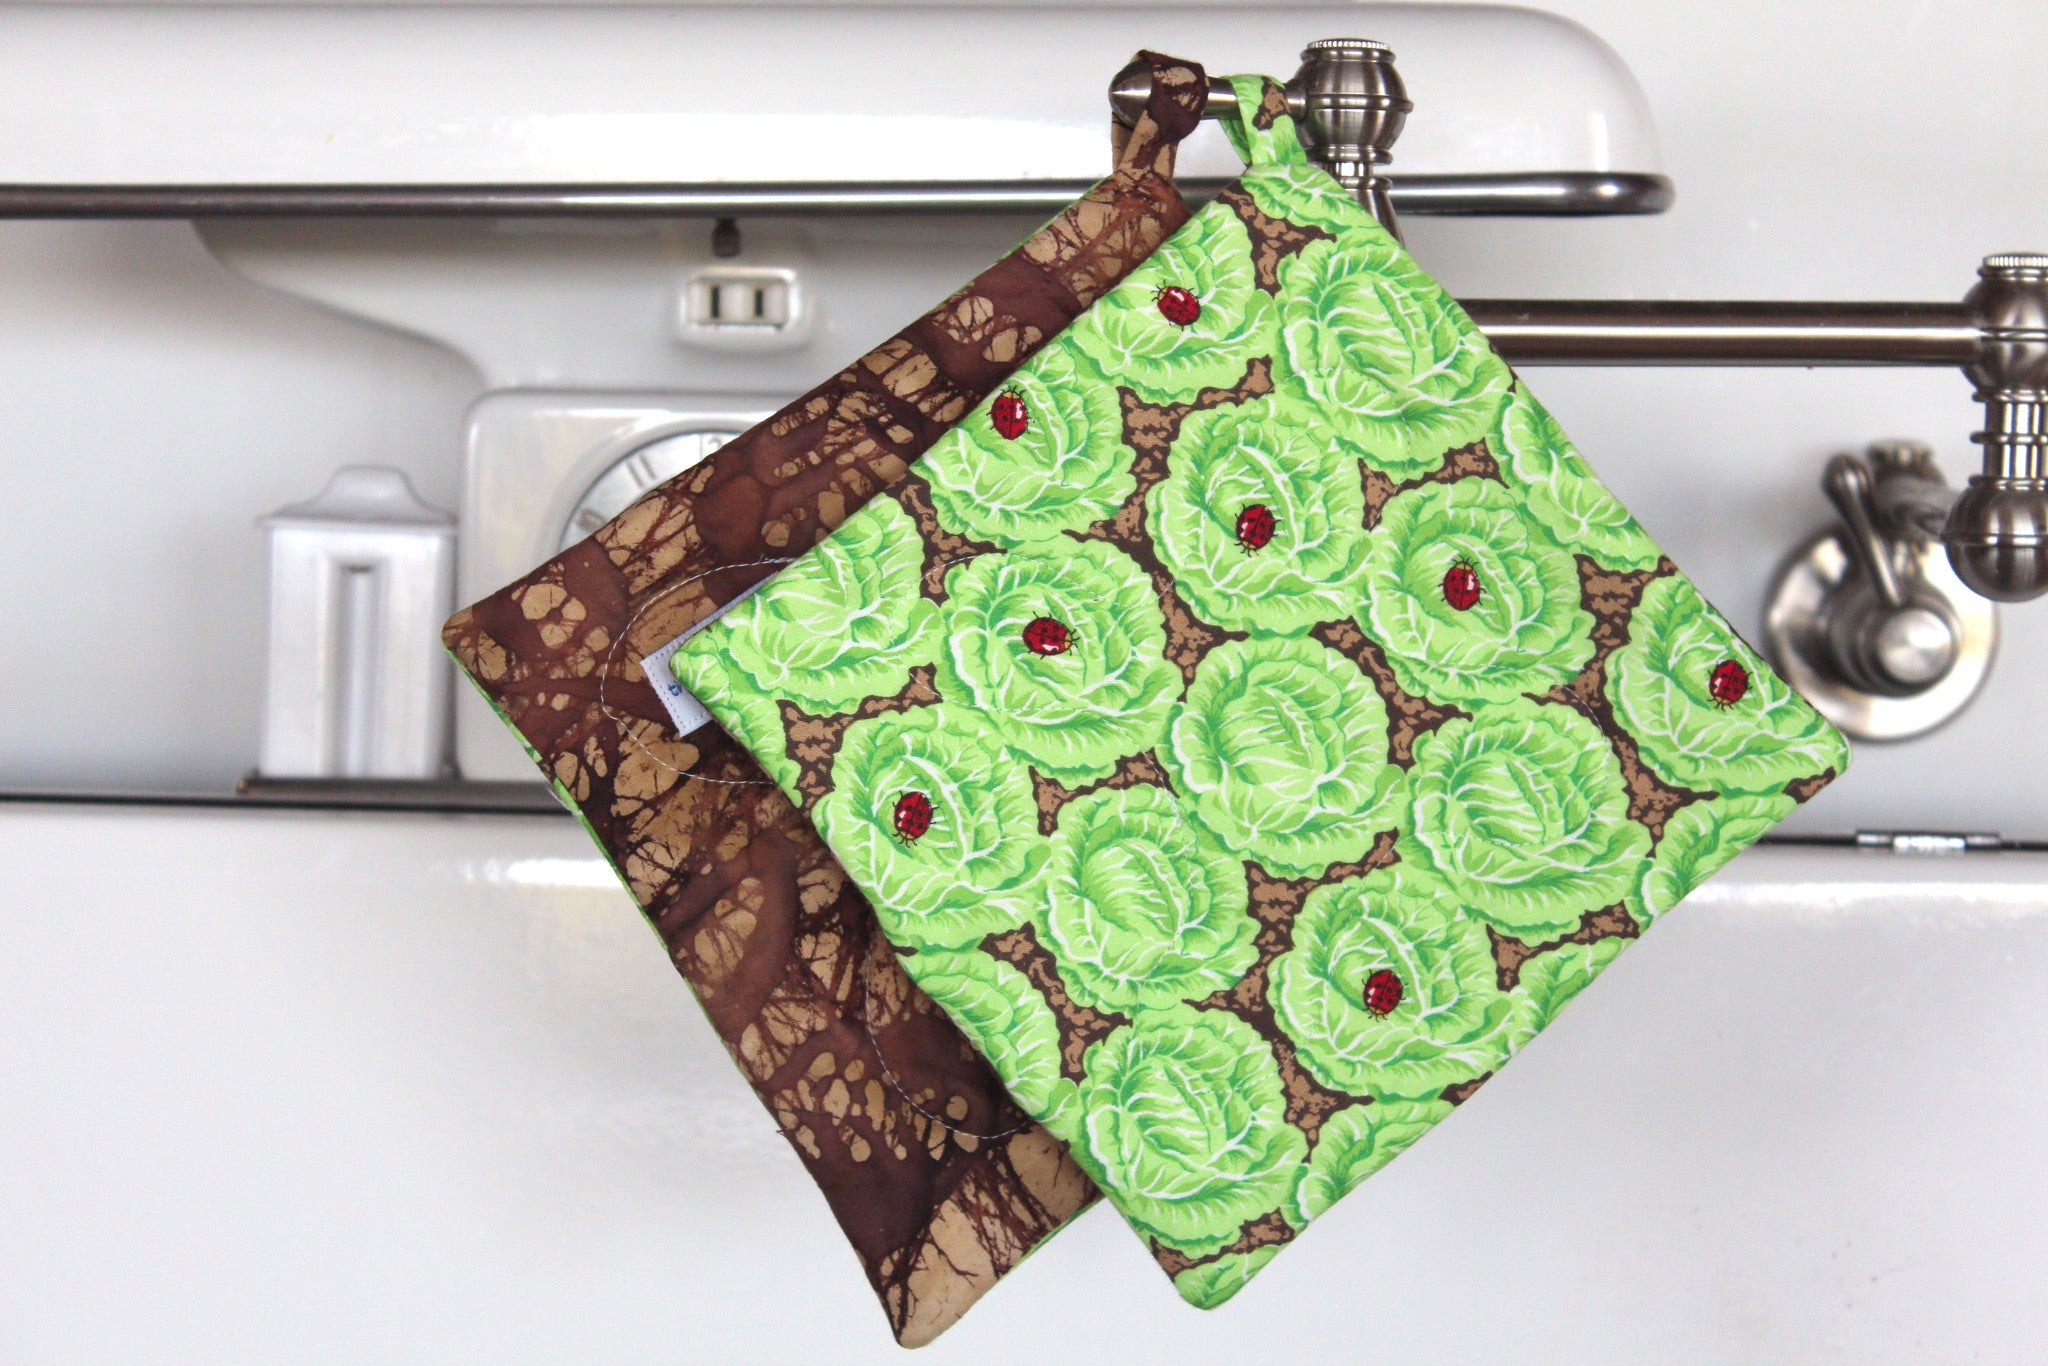 Cabbage Patch Potholder-The Blue Peony-Category_Pot Holder,Color_Brown,Color_Green,Department_Kitchen,Size_Traditional (Square),Theme_Food